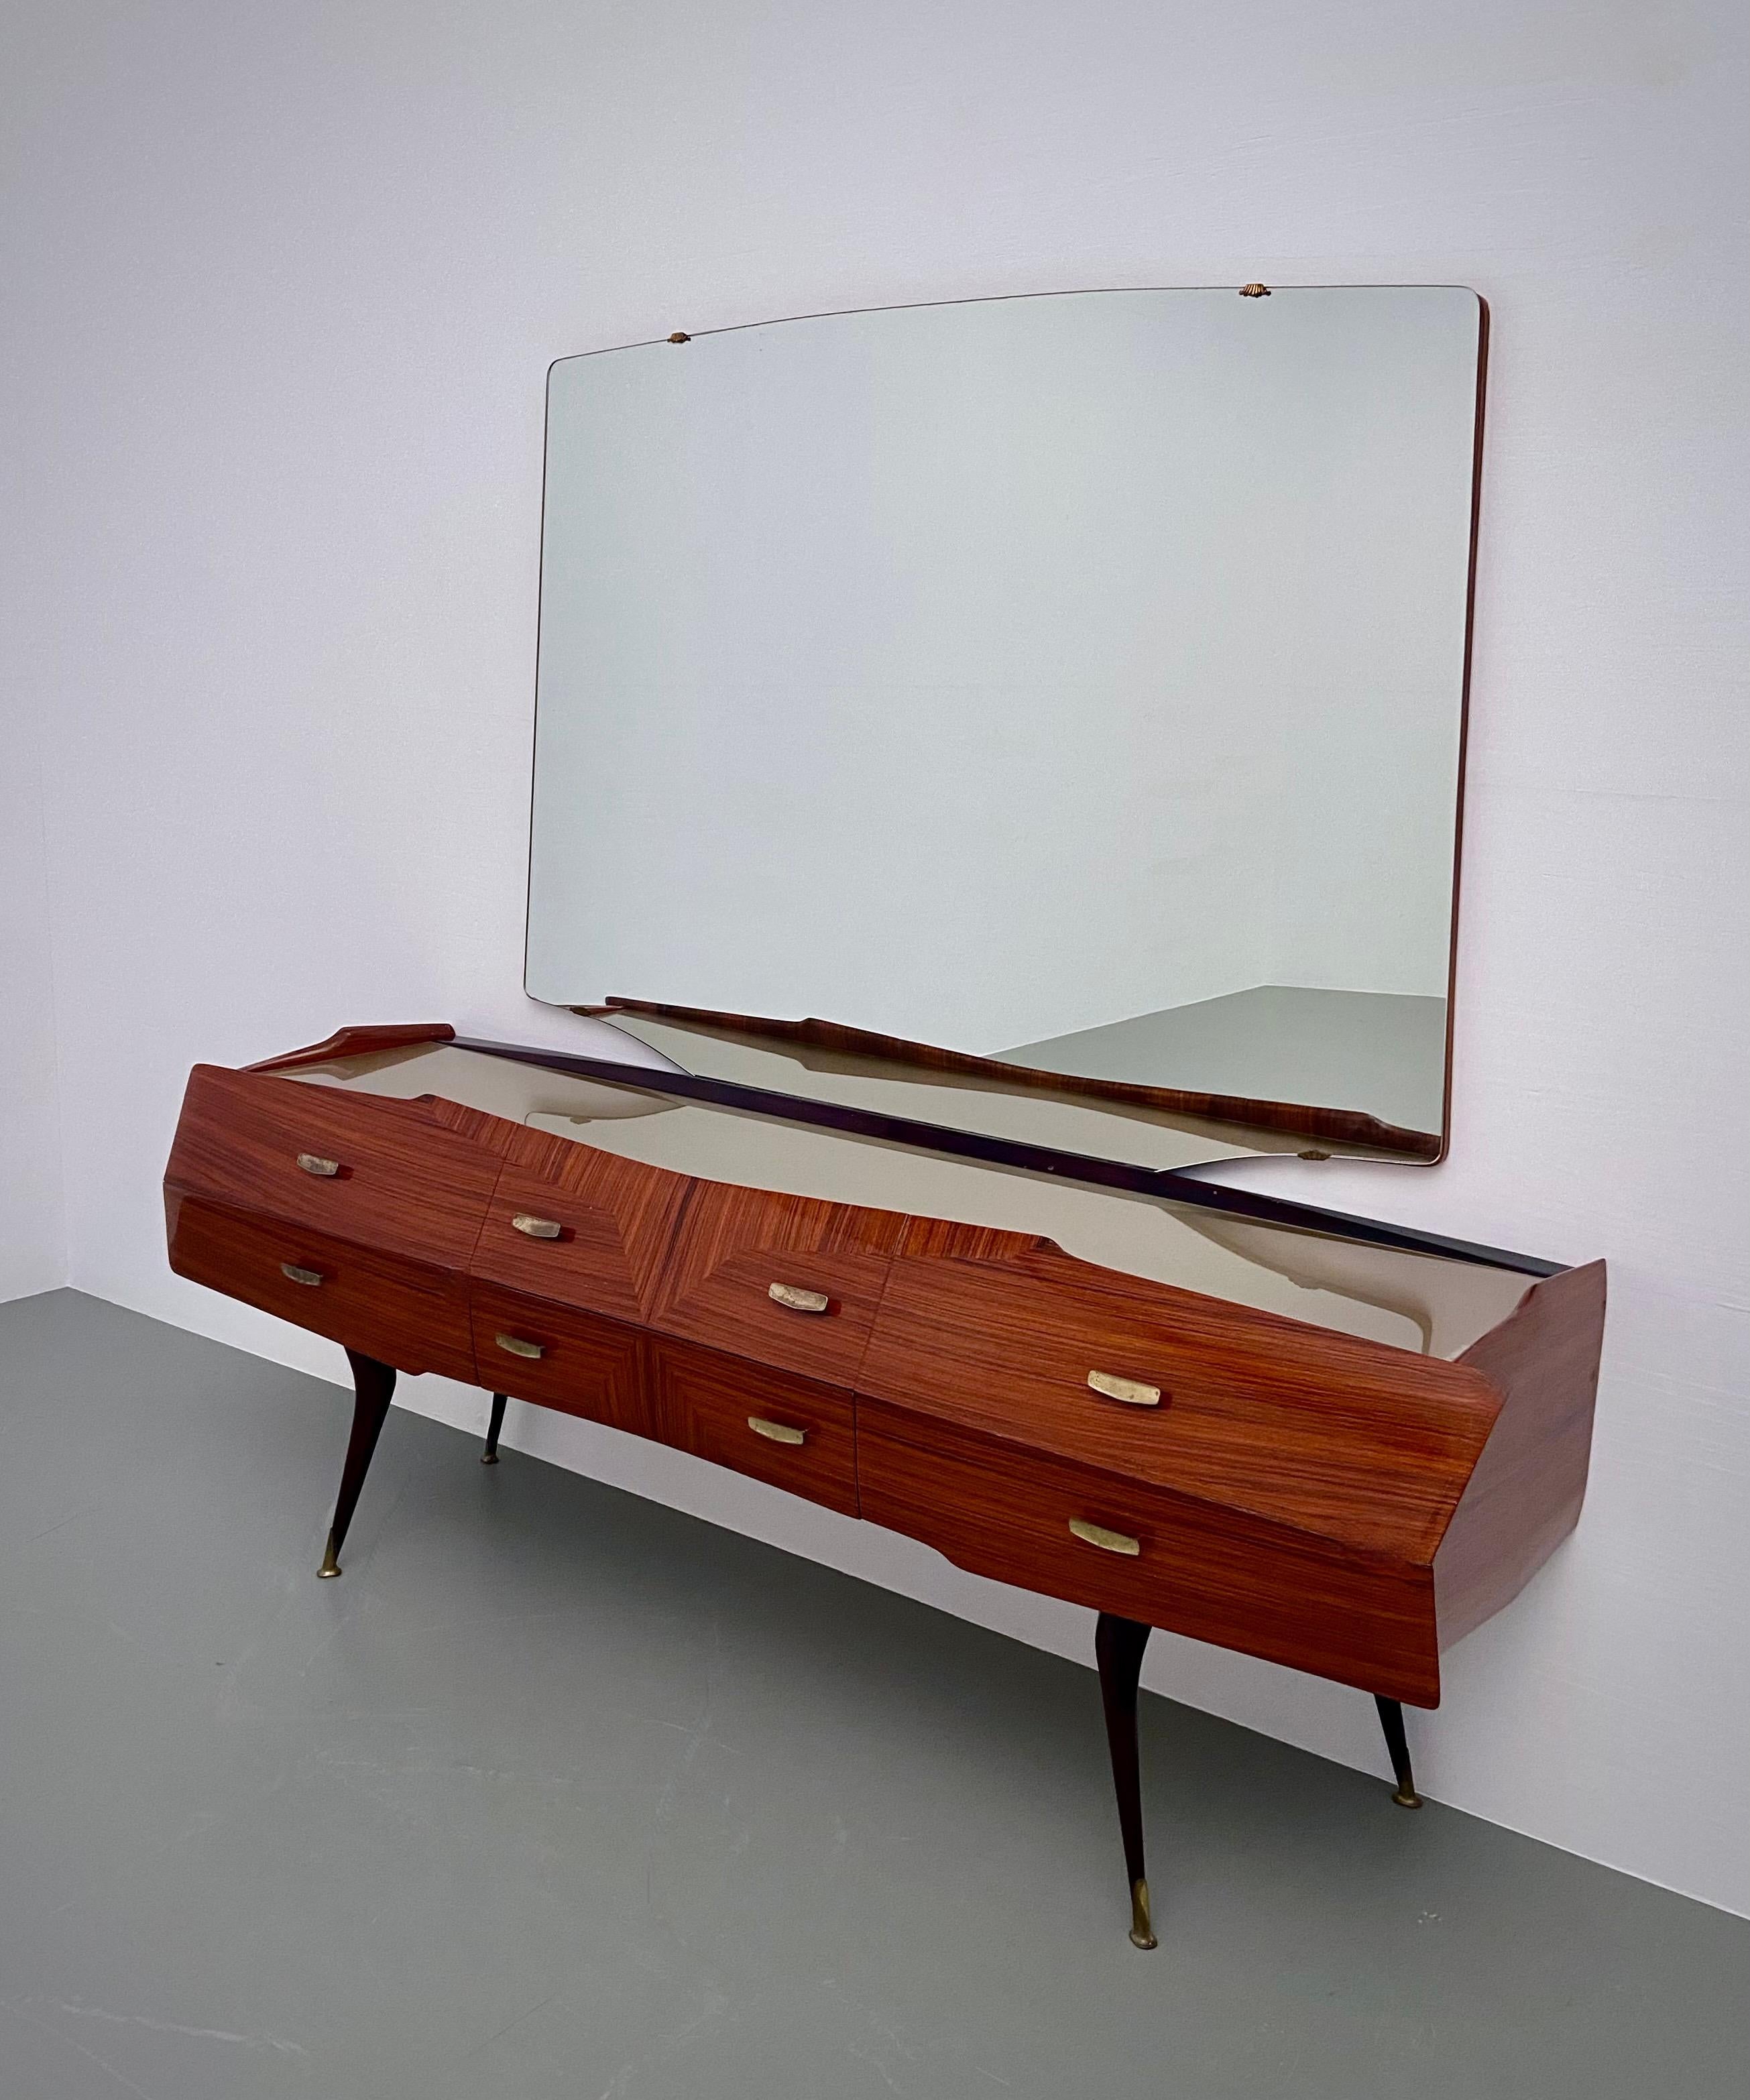 Typical Vittorio Dassi credenza with its futuristic shapes and shiny appearance. Some sort of spaceship but then with mirror to see how beautiful you are. Shiny, outspoken and luxurious all resting on bended ballerina legs (with brass feet) that are